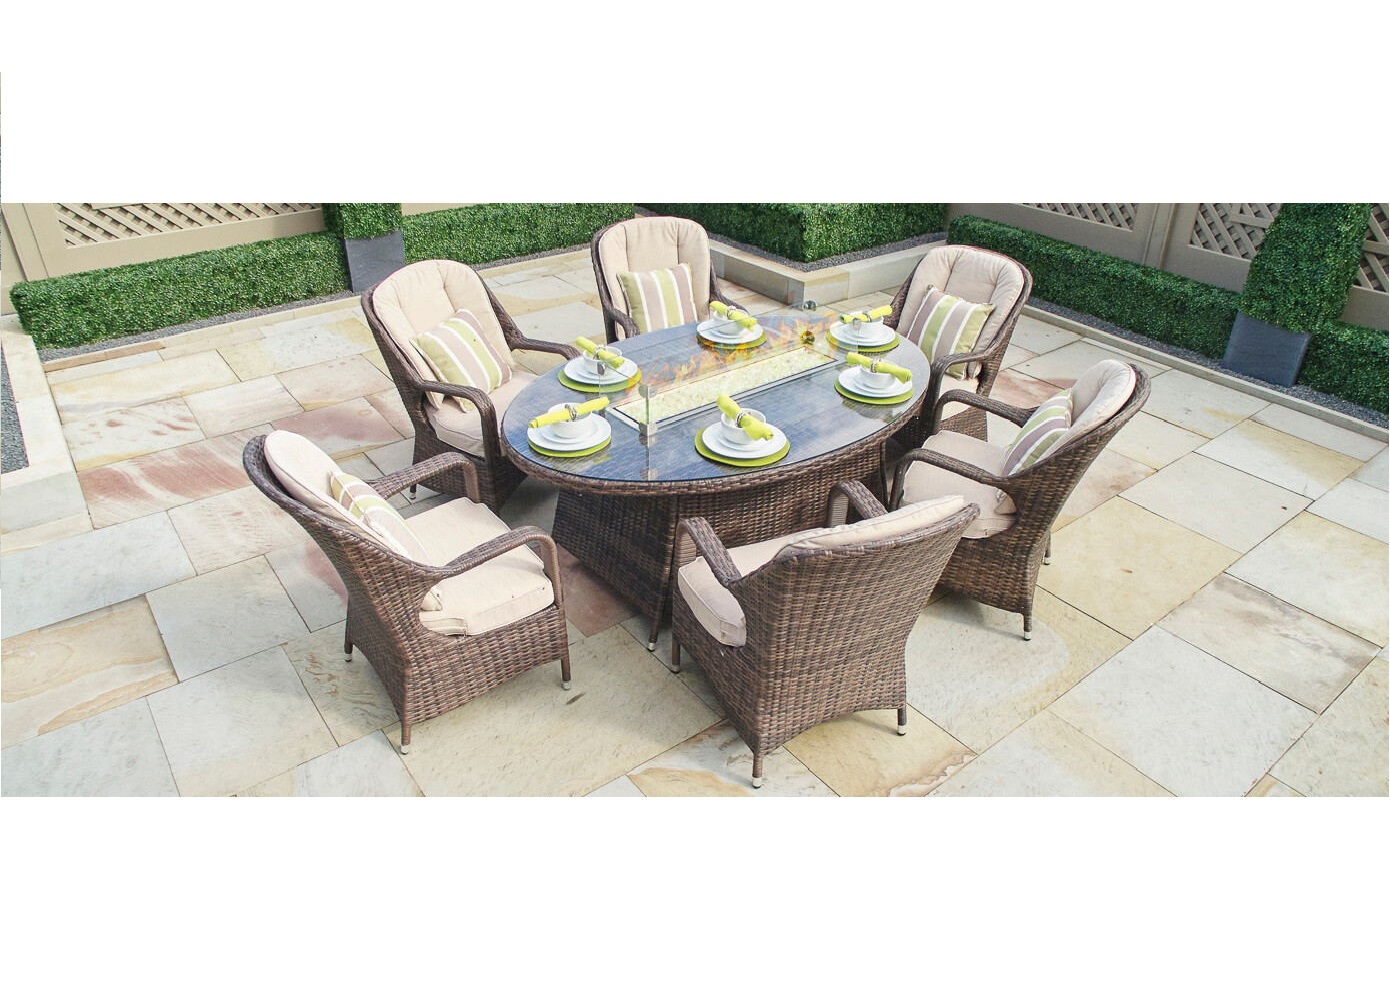 Patio Wicker Oval Table With Arm Chairs, Gas Fire Pit Table With Chairs